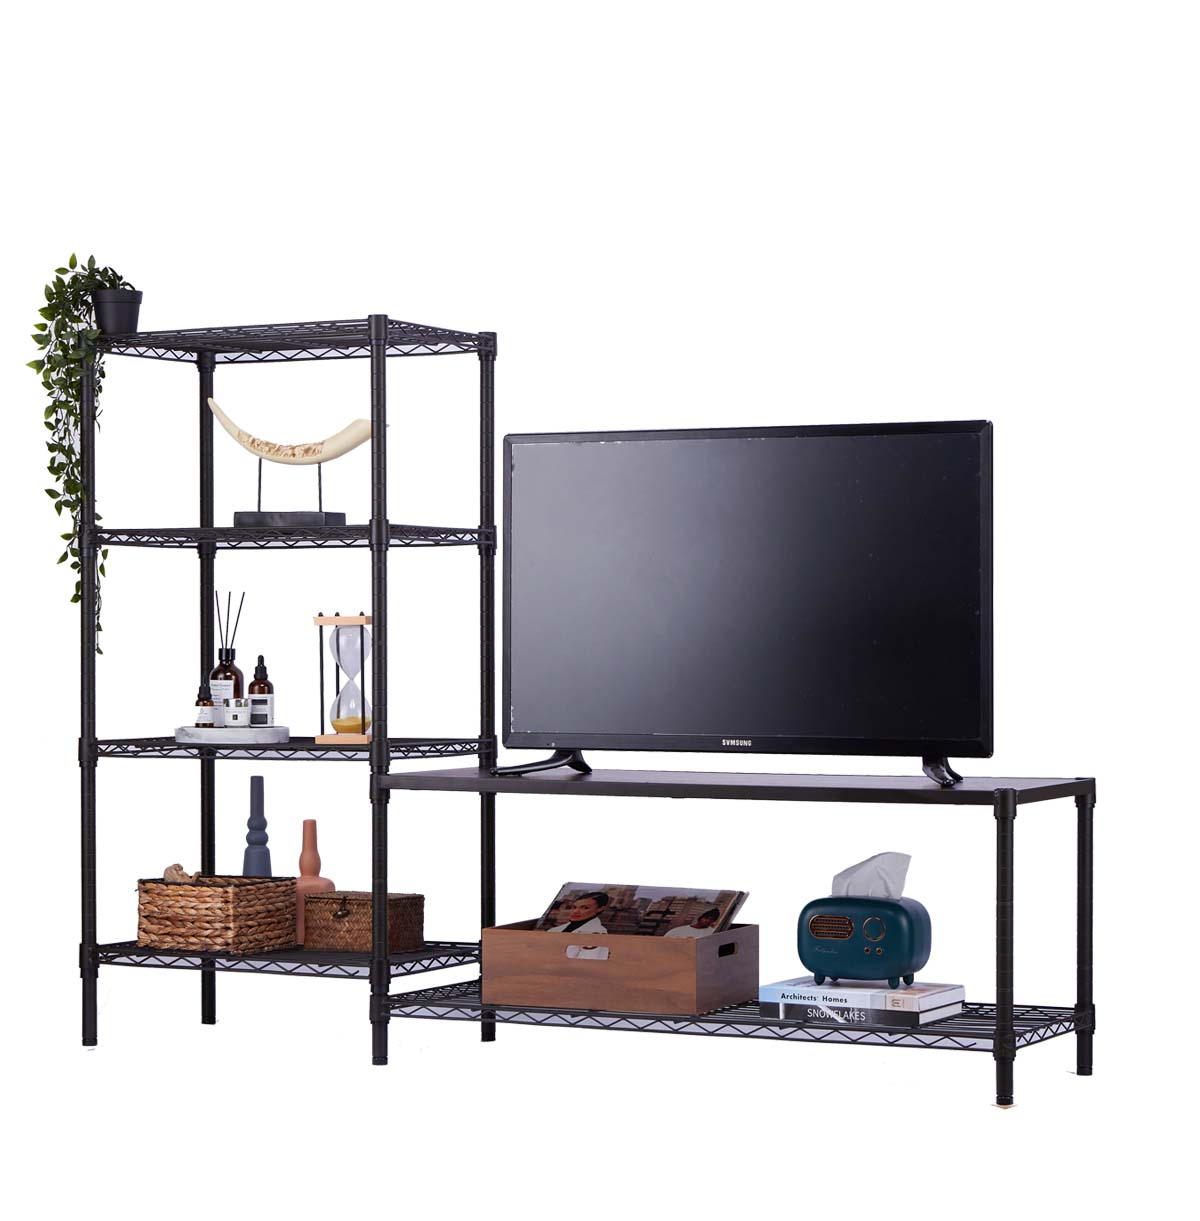 6-Tier Metal TV Stand For 42 Inch TV/ Entertainment Center / TV Console Table With Open Storage Shelves For Living Room / Bedroom